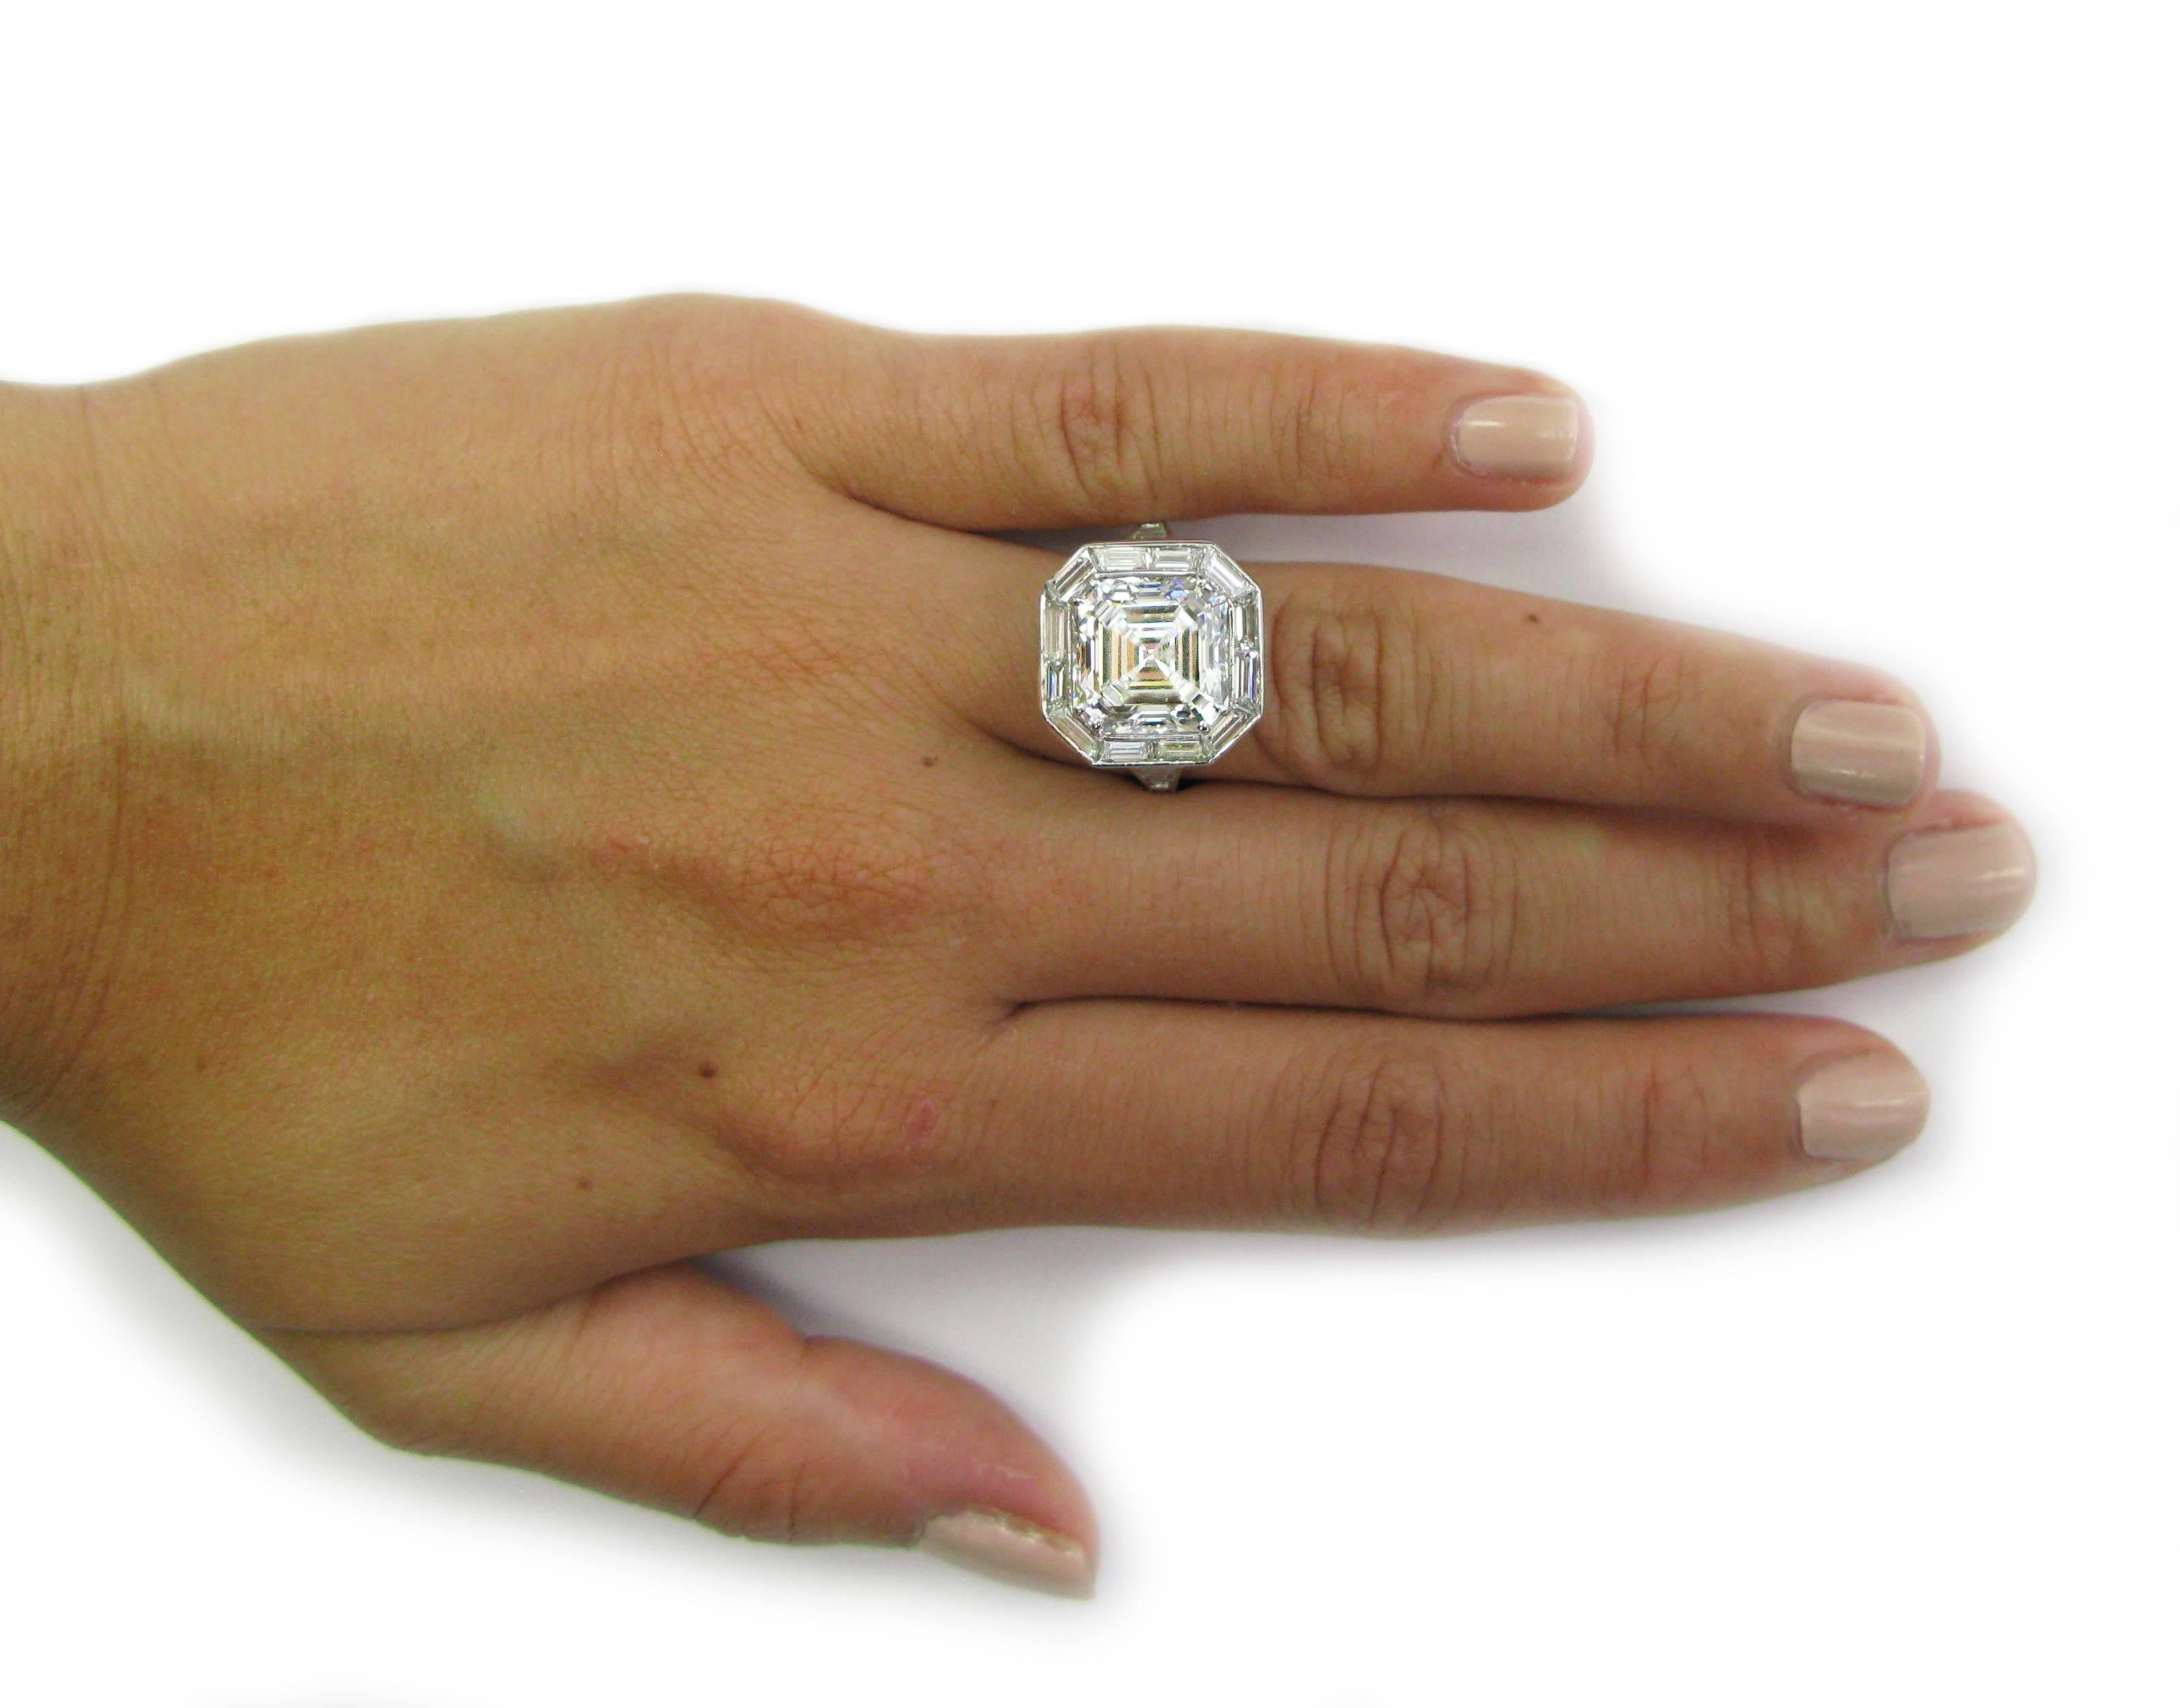 This fantastic handmade platinum ring contains approximately 2.50ctw of straight baguette diamonds forming a frame around a 6.01 carat Asscher-cut diamond with H color and SI1 clarity. This beauty will have all the heads turning in your